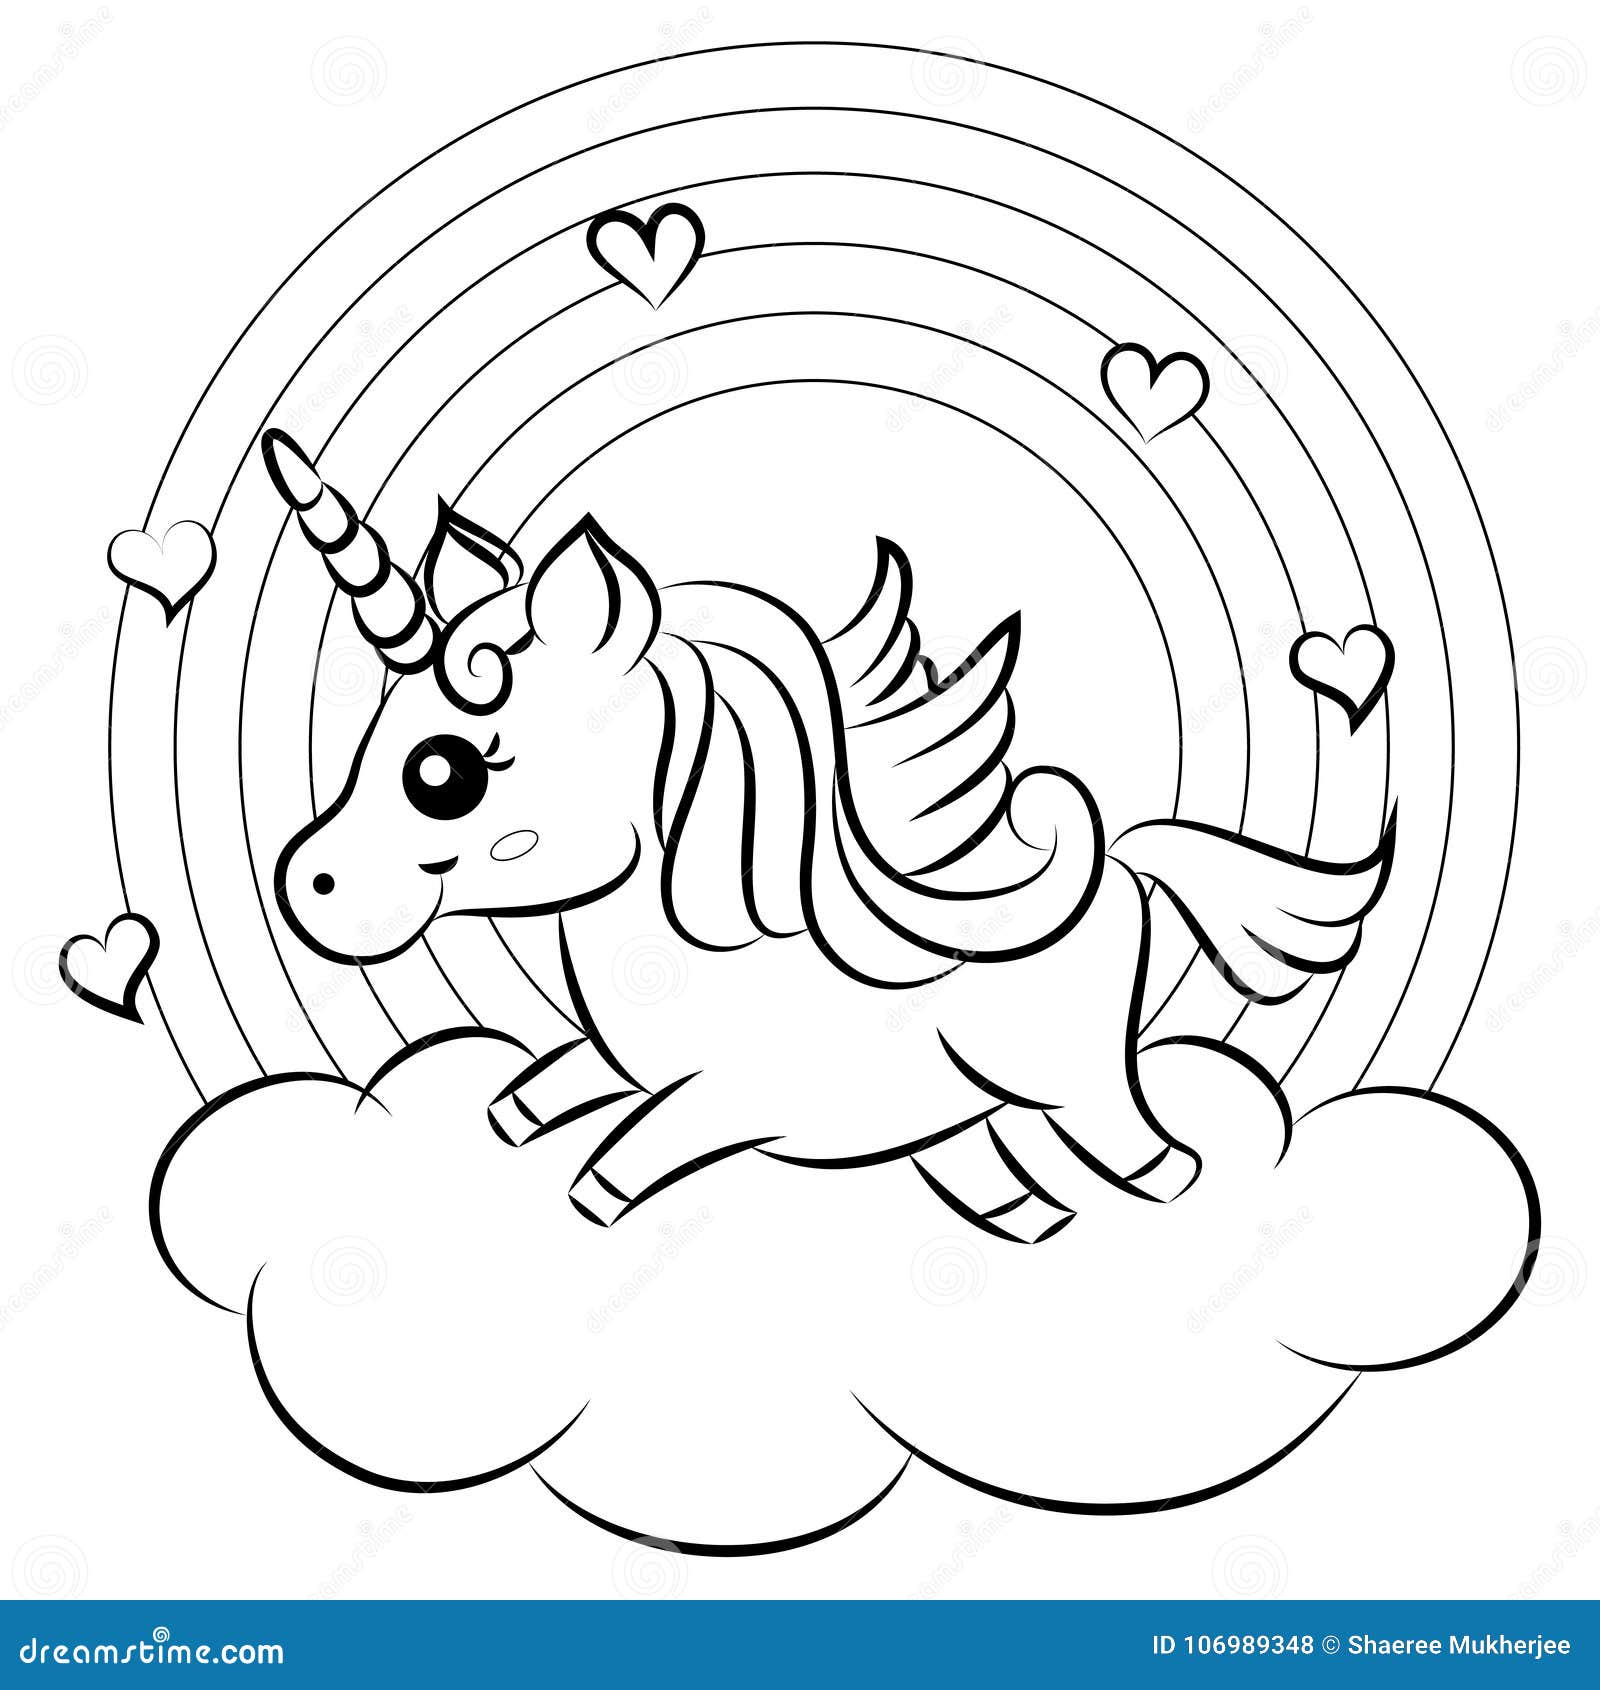  Cute  Cartoon Vector Unicorn With Rainbow  Coloring  Page  